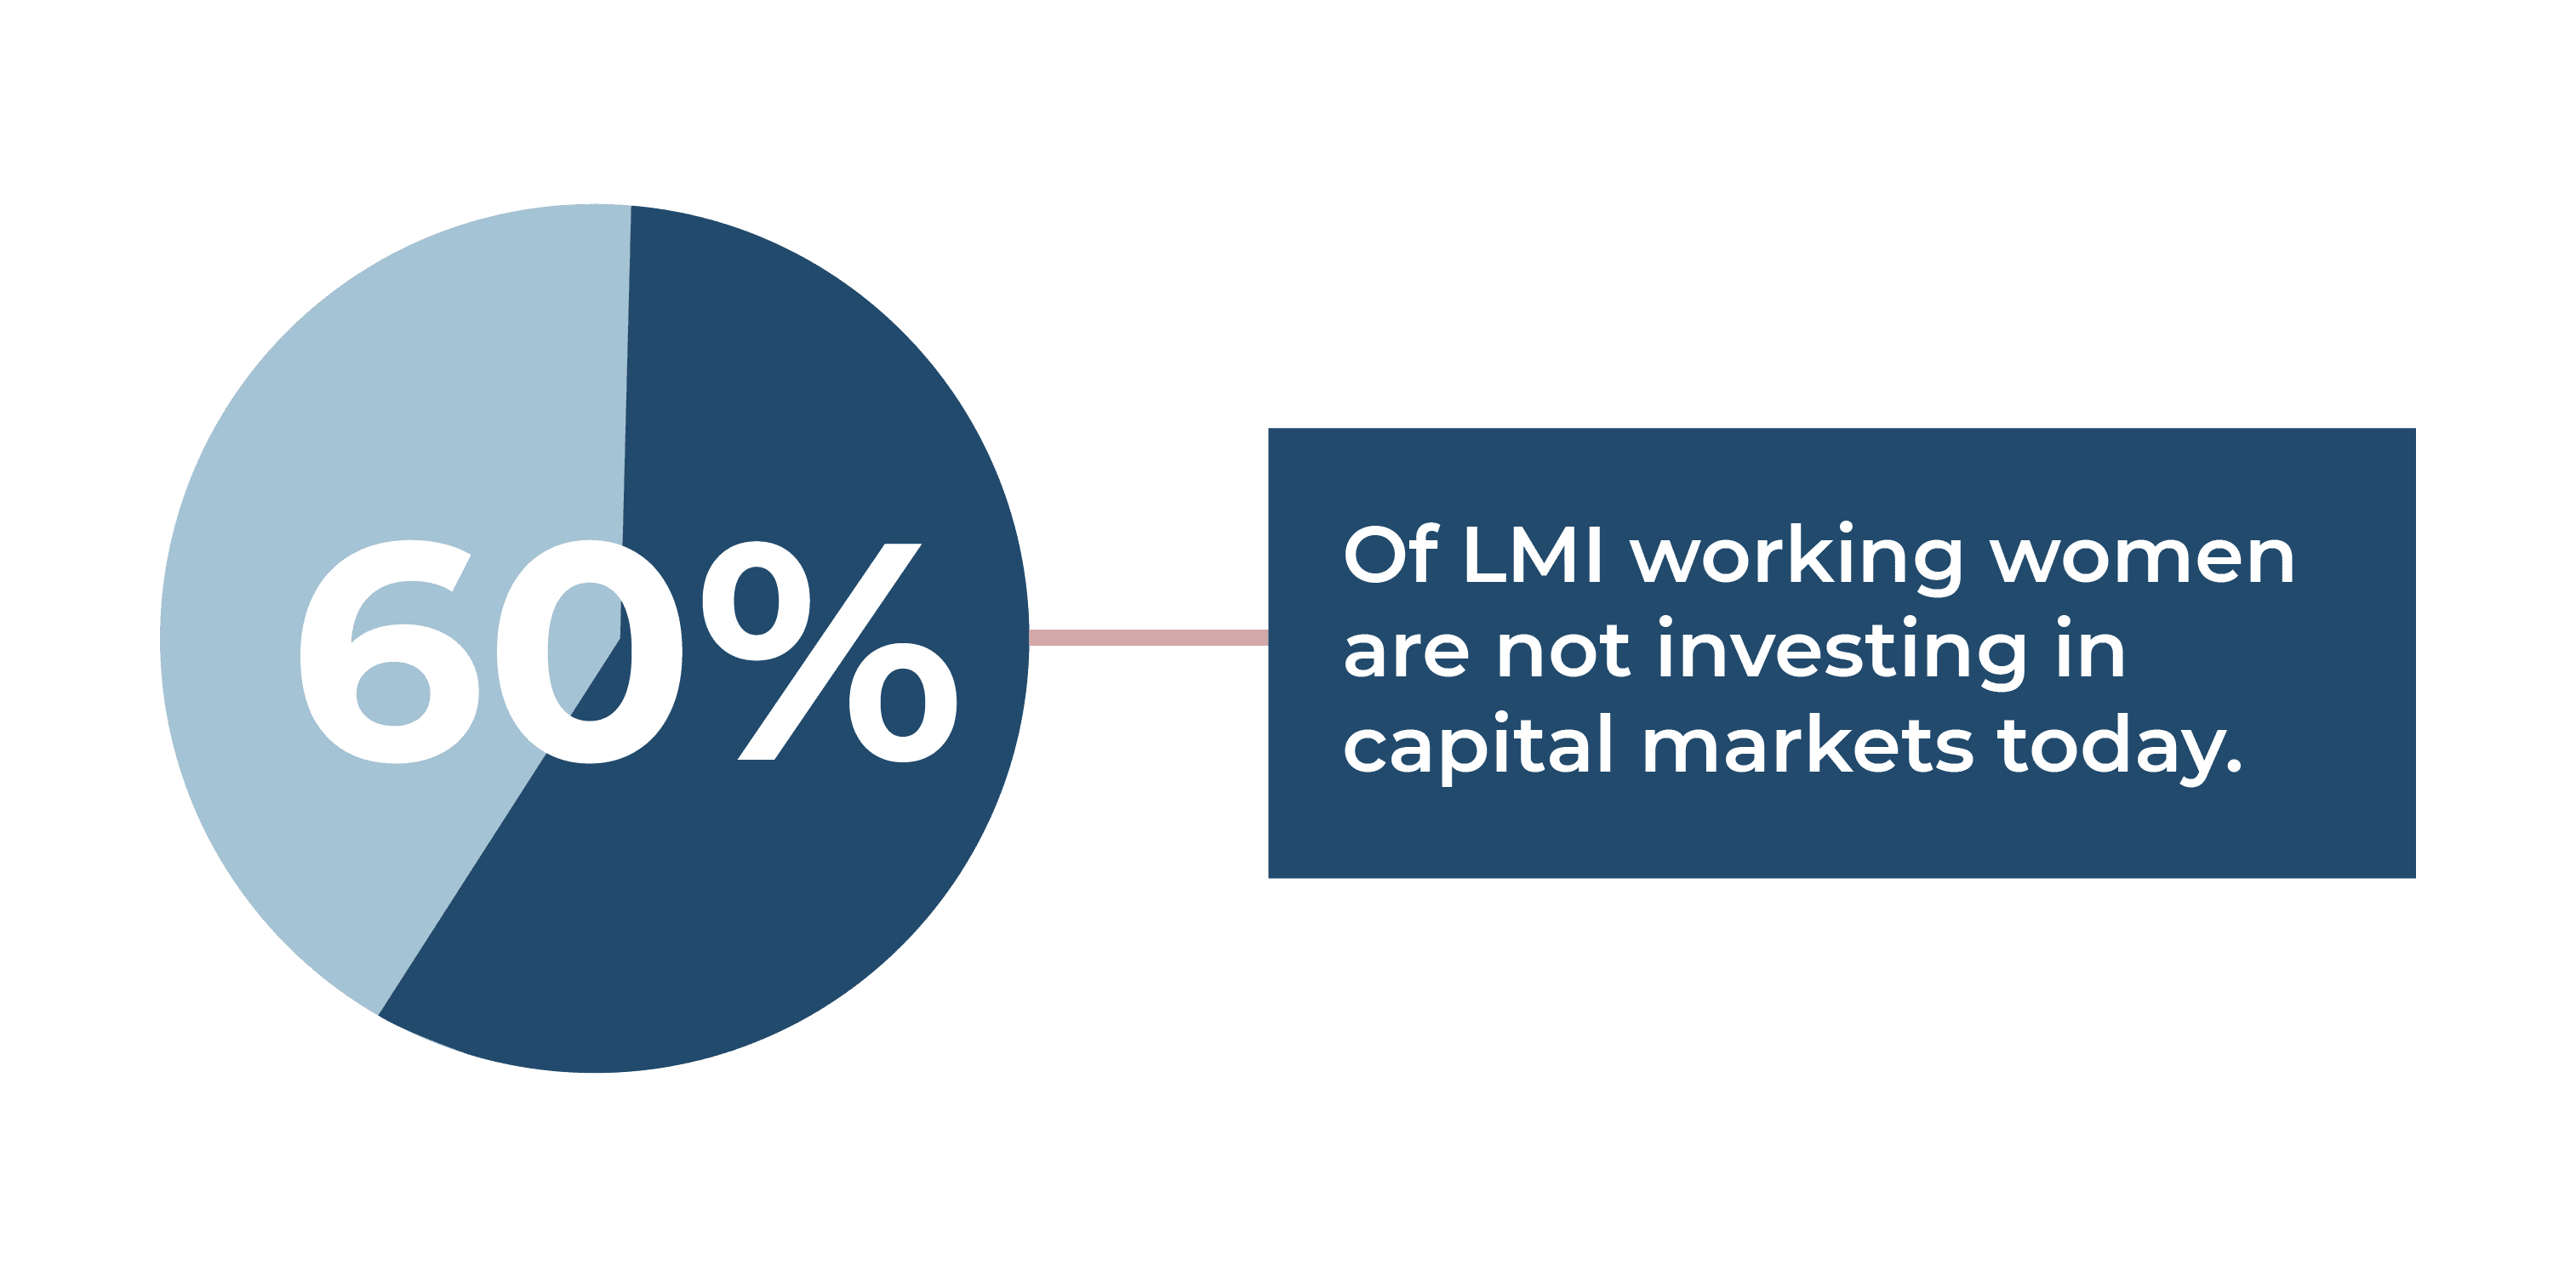 60% of LMI working women are not currently investing in capital markets today.